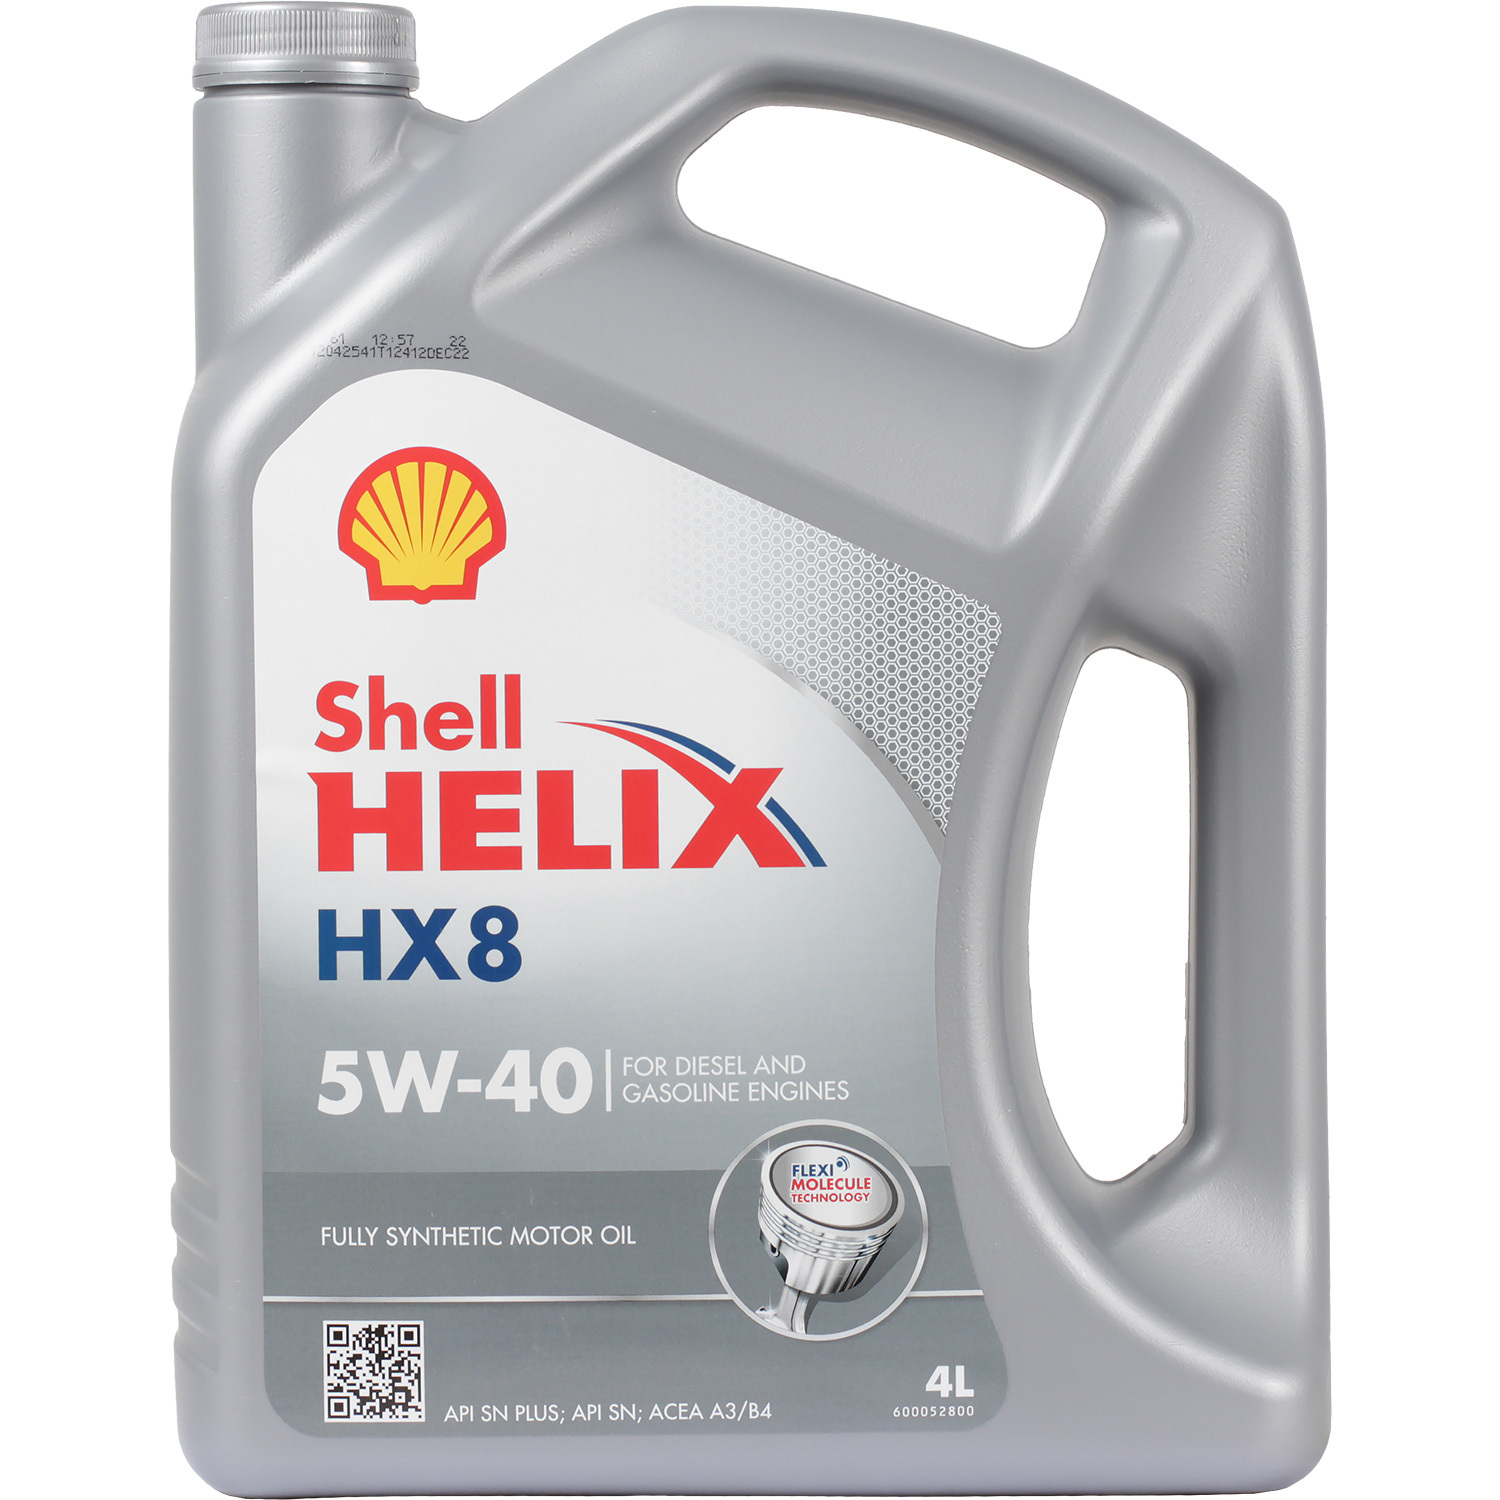 Shell Моторное масло Shell Helix HX8 5W-40, 4 л масло моторное shell hx8 5w40 1л